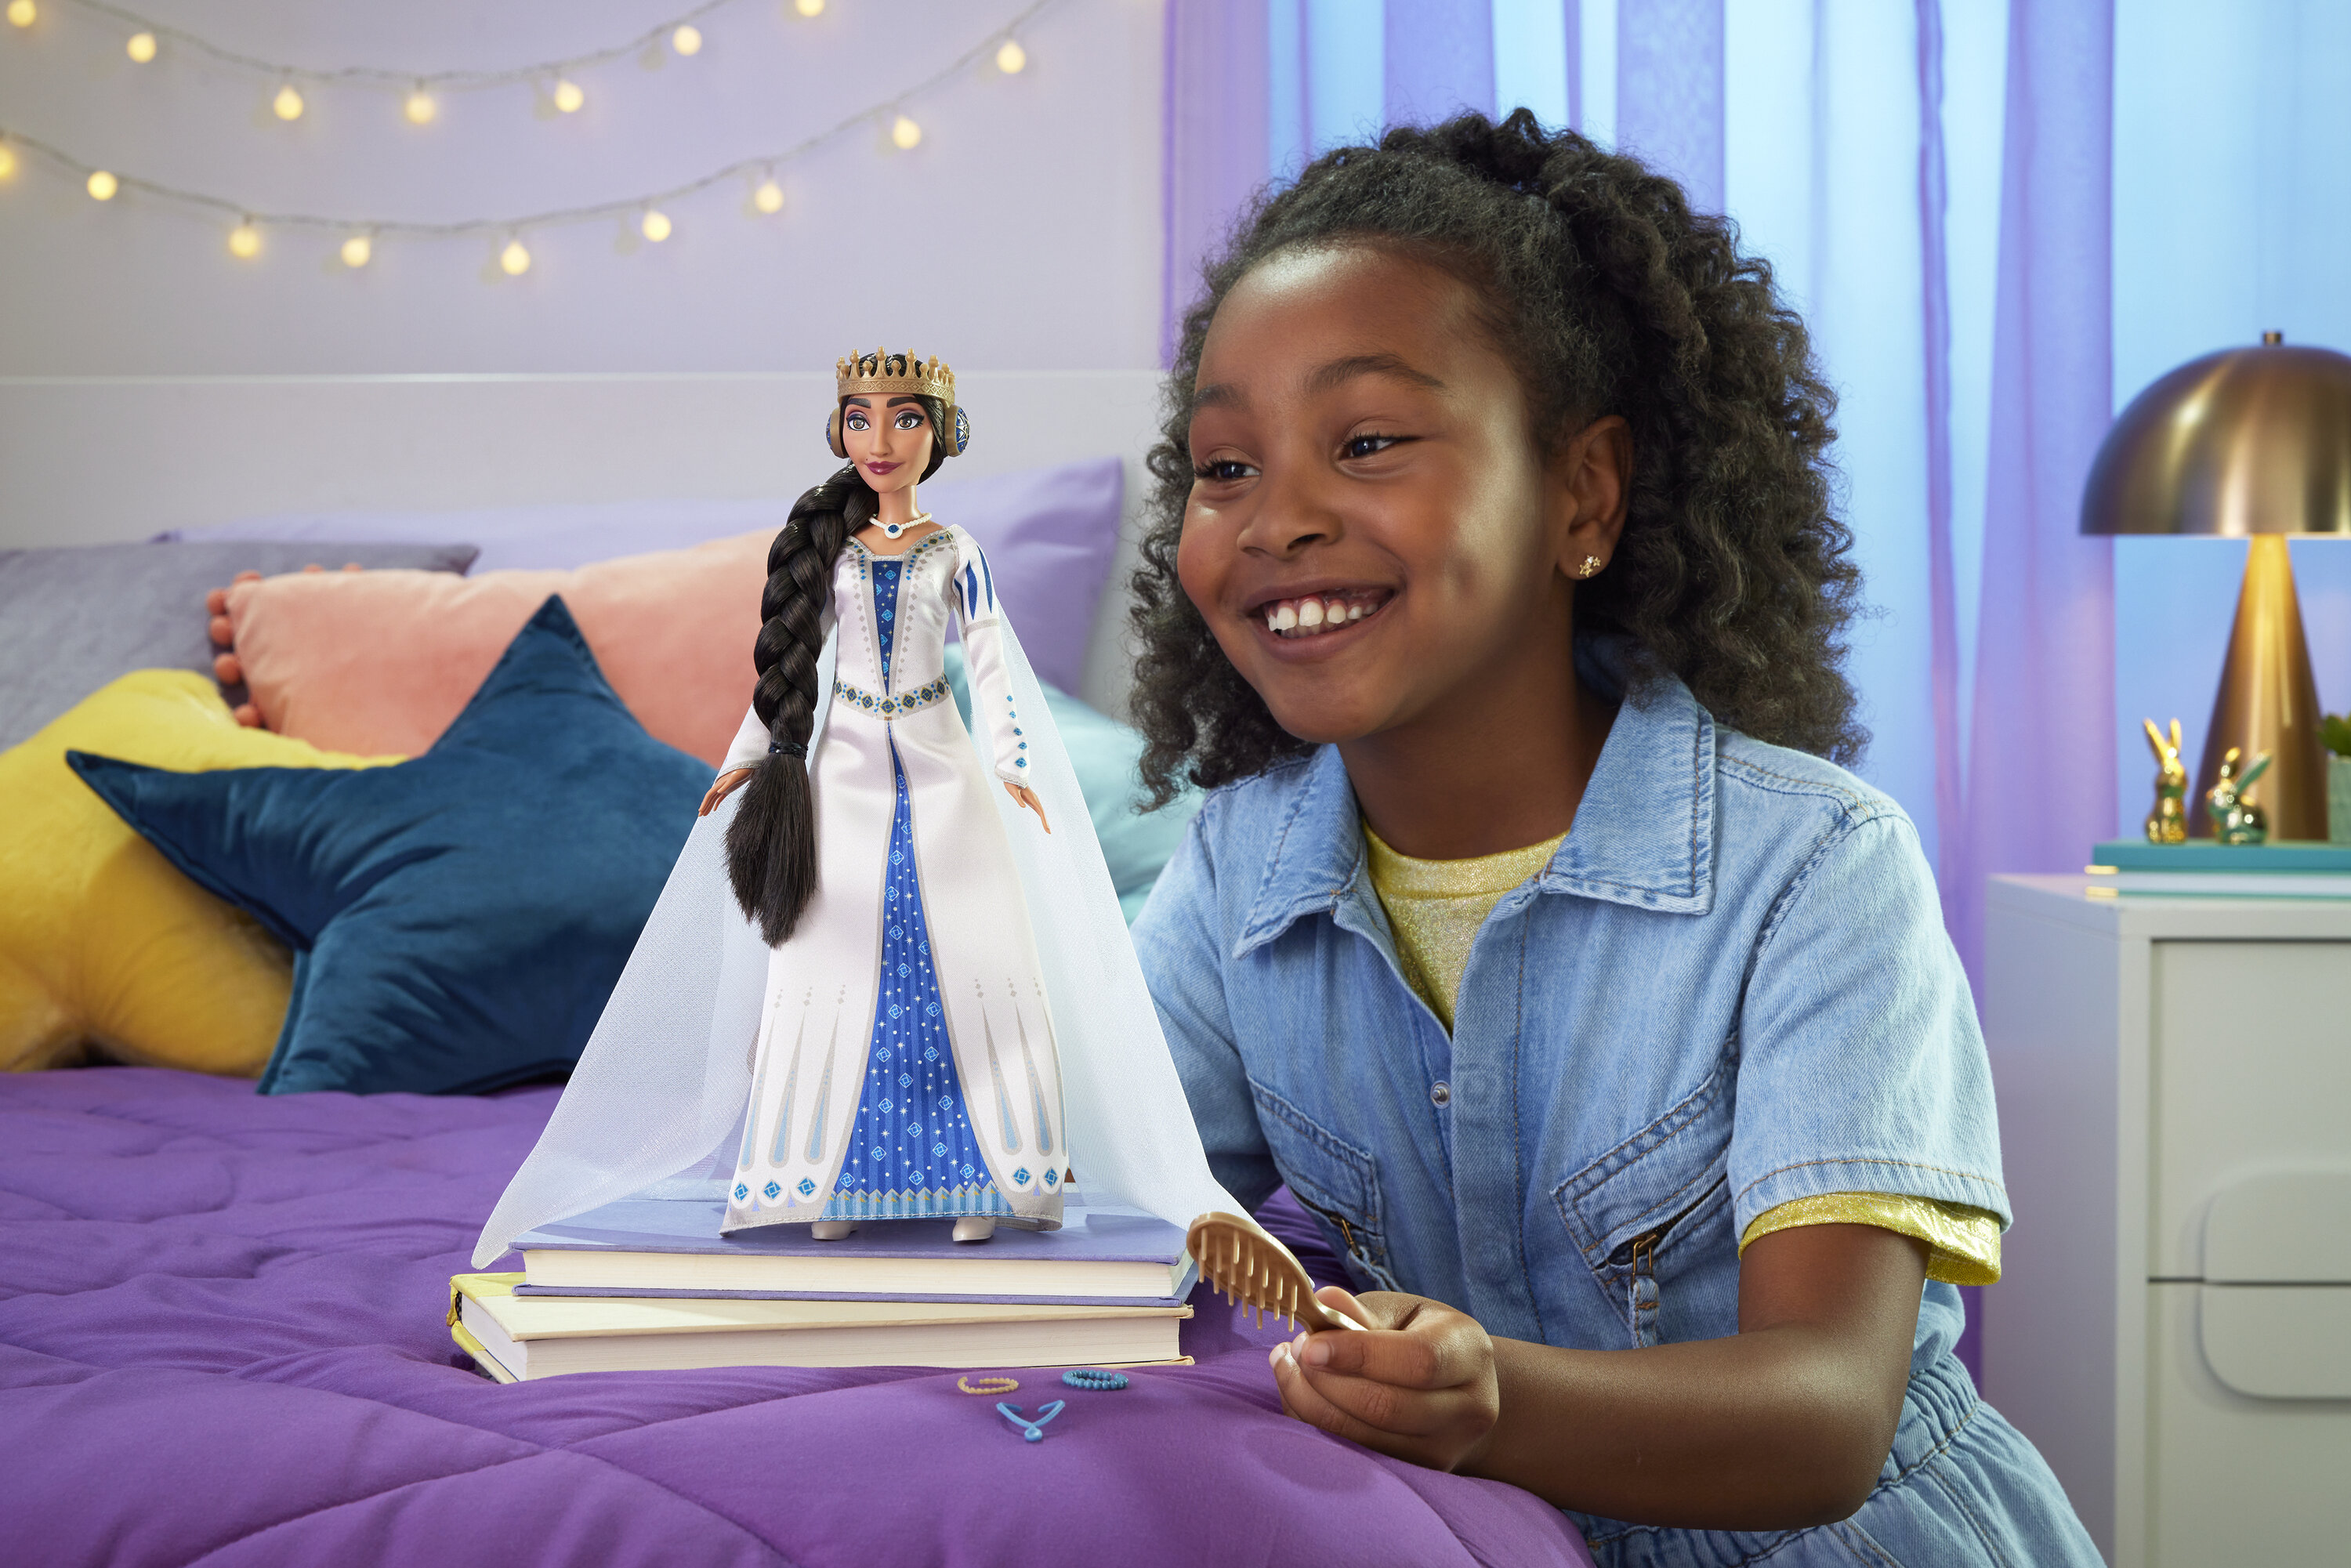 Disney Wish Queen Amaya of Rosas 11 inch Fashion Doll, Posable Doll & Accessories - image 3 of 7